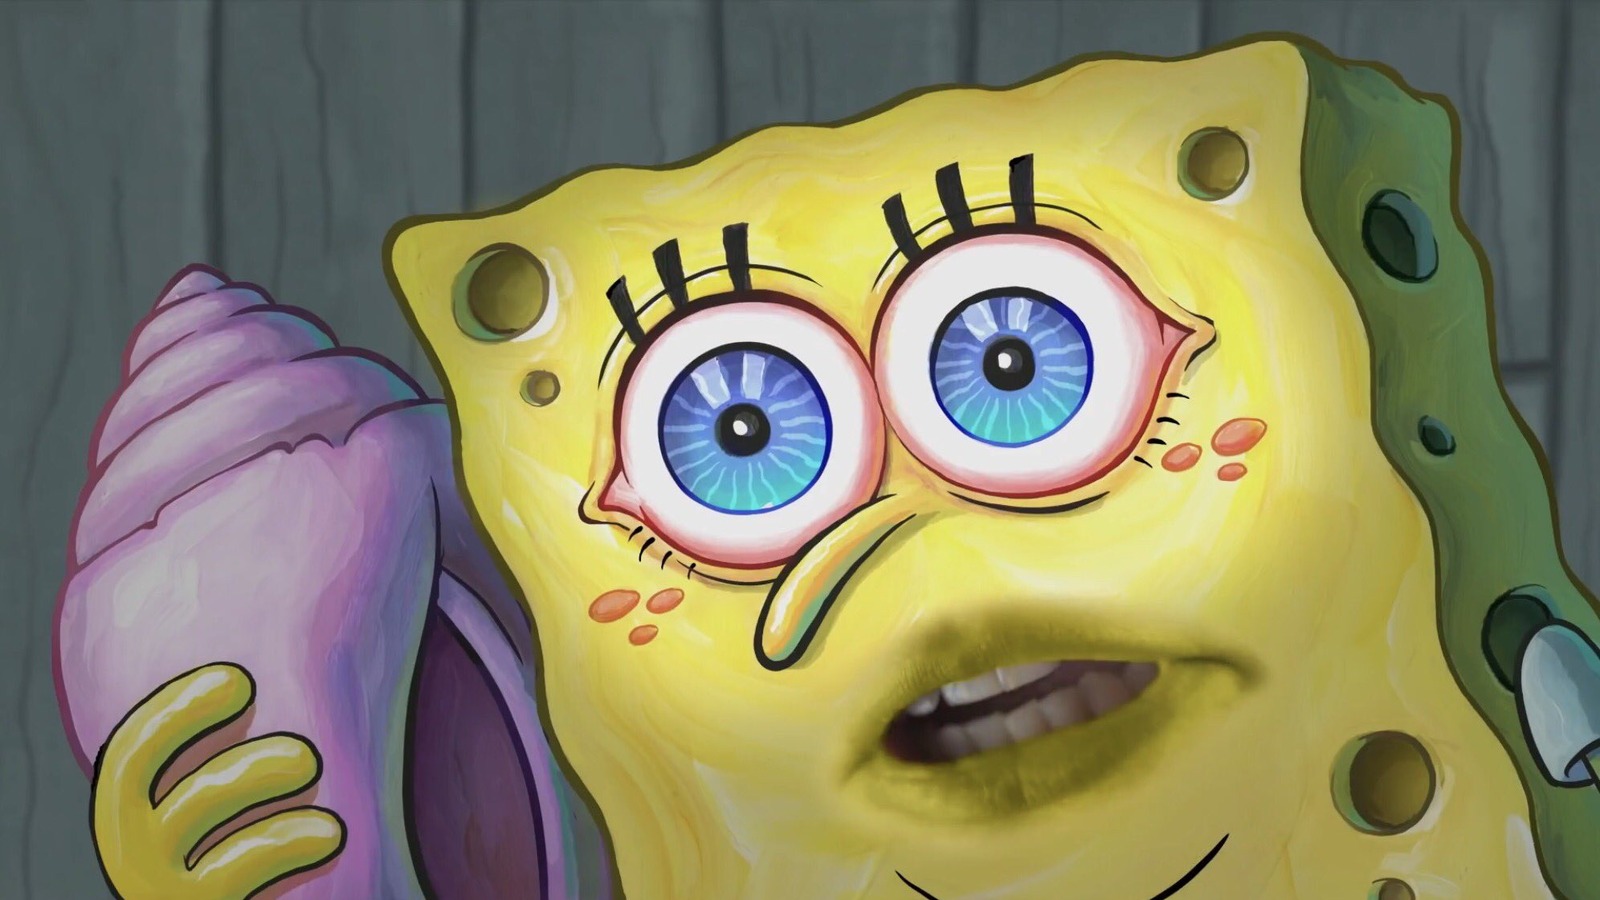 The SpongeBob SquarePants Details That Are Darker Than You Think.